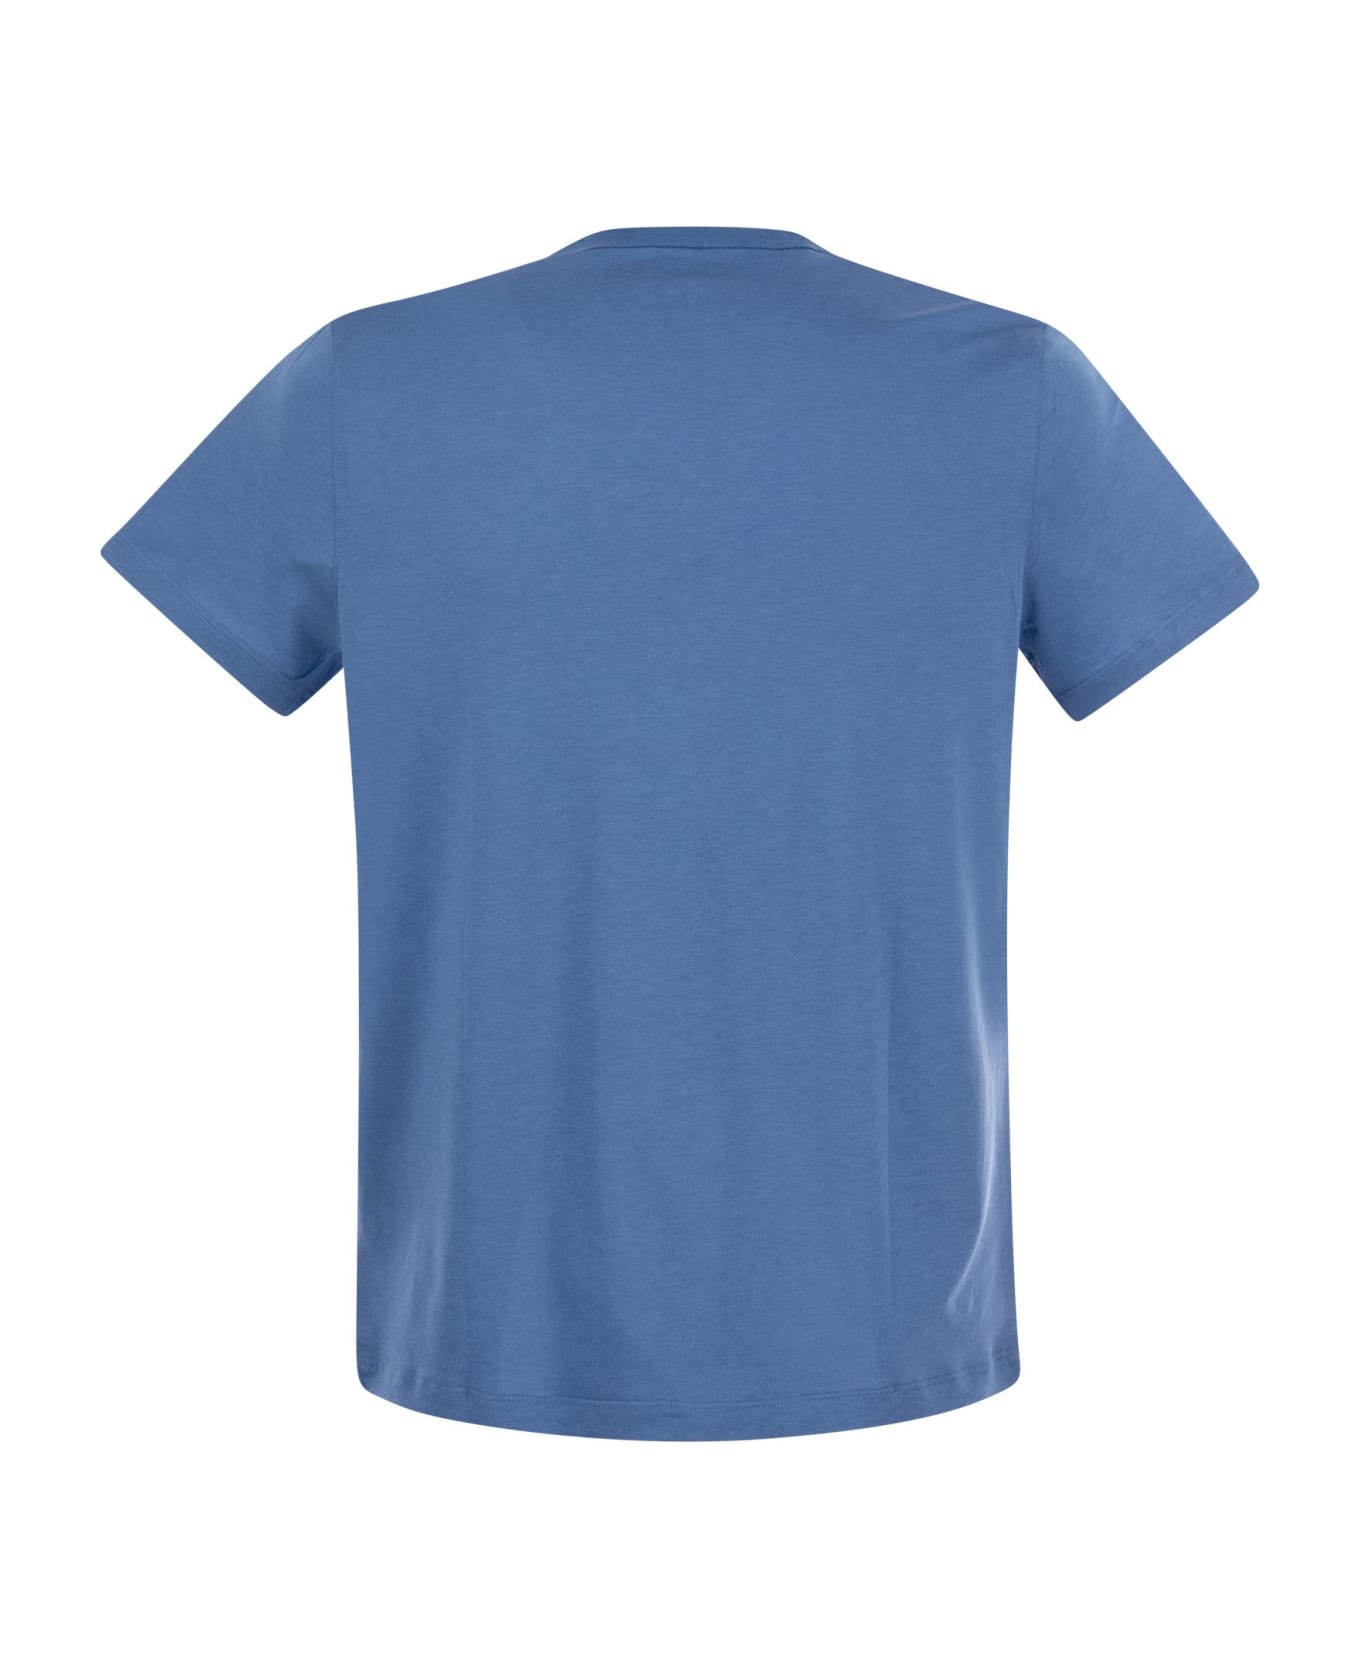 Majestic Filatures Crew-neck T-shirt In Lyocell And Cotton - Light Blue